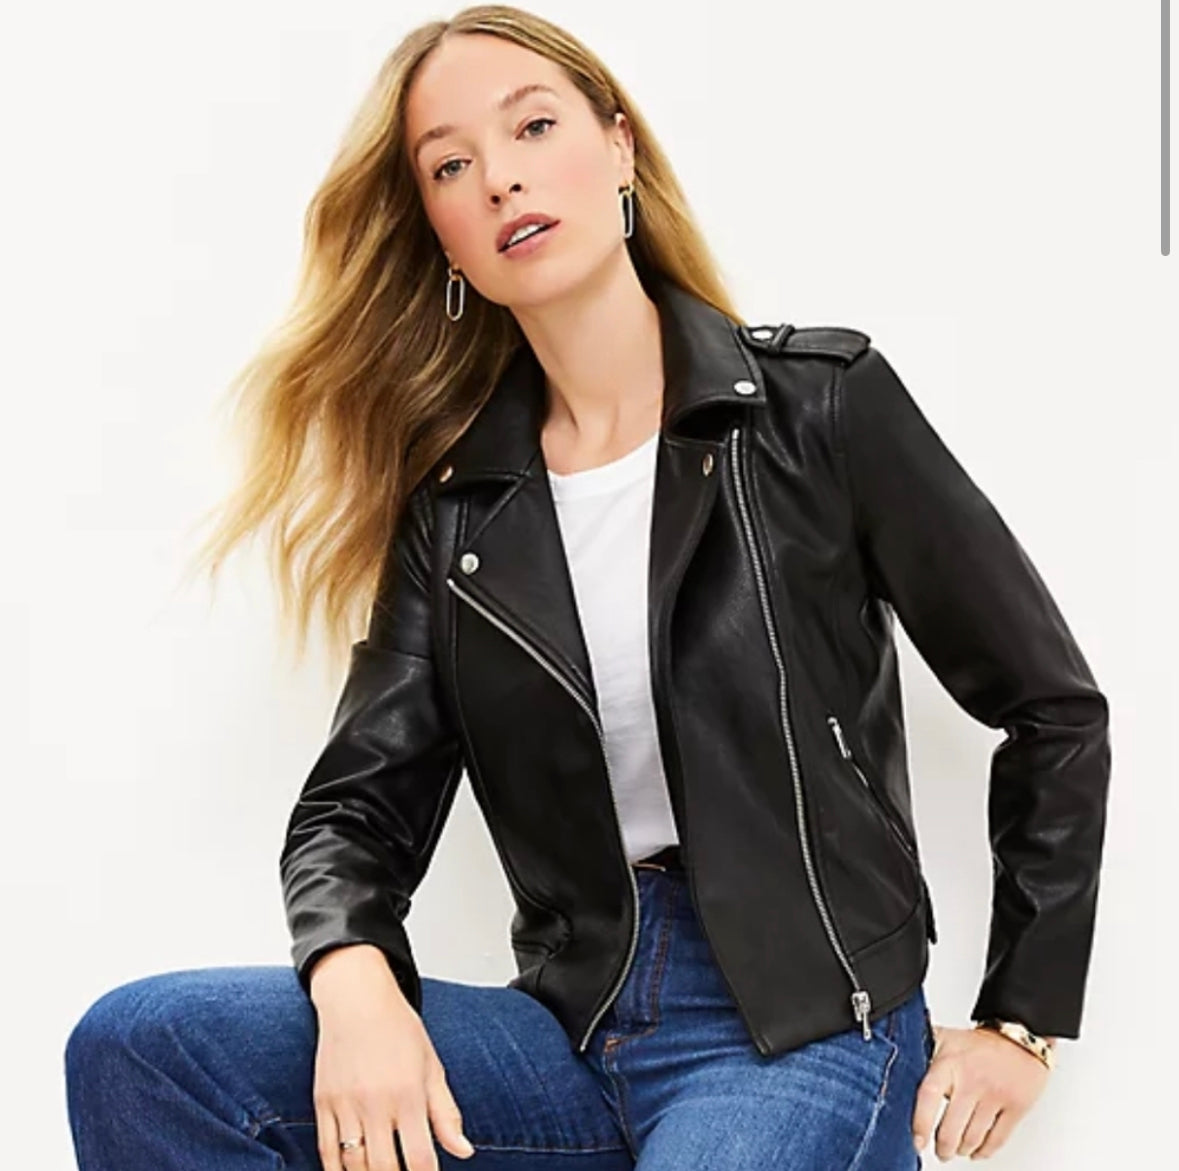 LOFT New Pebbled Faux Leather Moto Jacket Size Small